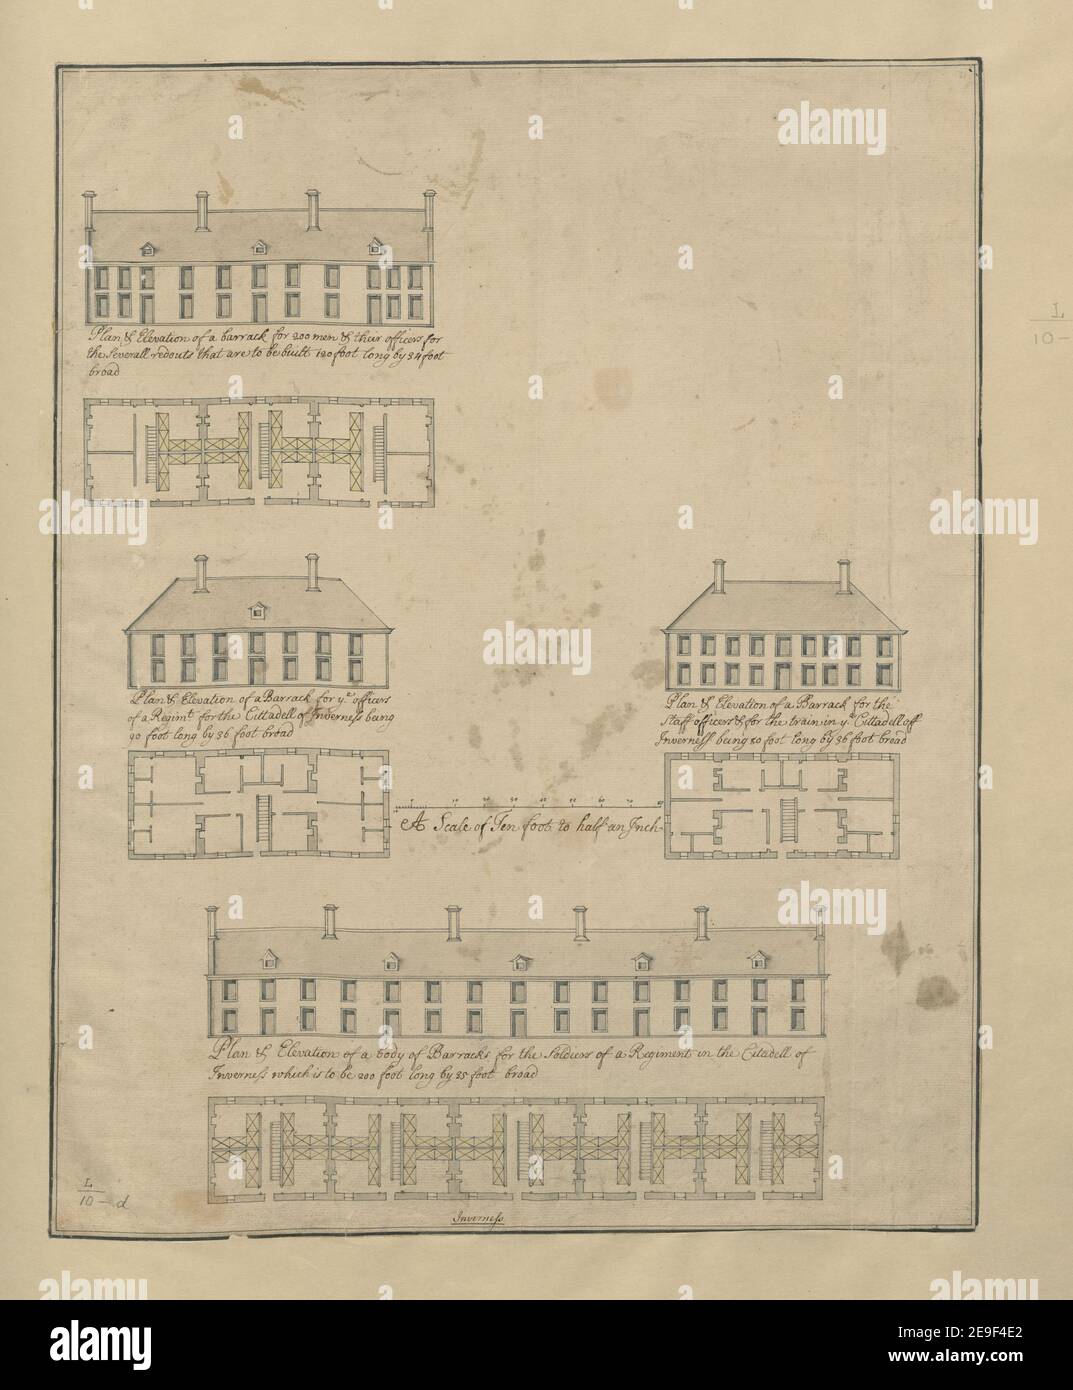 Plan & Elevation of a barrack for 200 men & their officers for the severall redoubts that are to be built 120 feet long by 34 foot broad  Visual Material information:  Title: Plan , Elevation of a barrack for 200 men , their officers for the severall redoubts that are to be built 120 feet long by 34 foot broad  50.10.d. Date of publication: [around 1720]  Item type: 1 drawing Medium: pen with black and red ink with monochrome wash Dimensions: sheet 51.1 x 40.6 cm  Former owner: George III, King of Great Britain, 1738-1820 Stock Photo